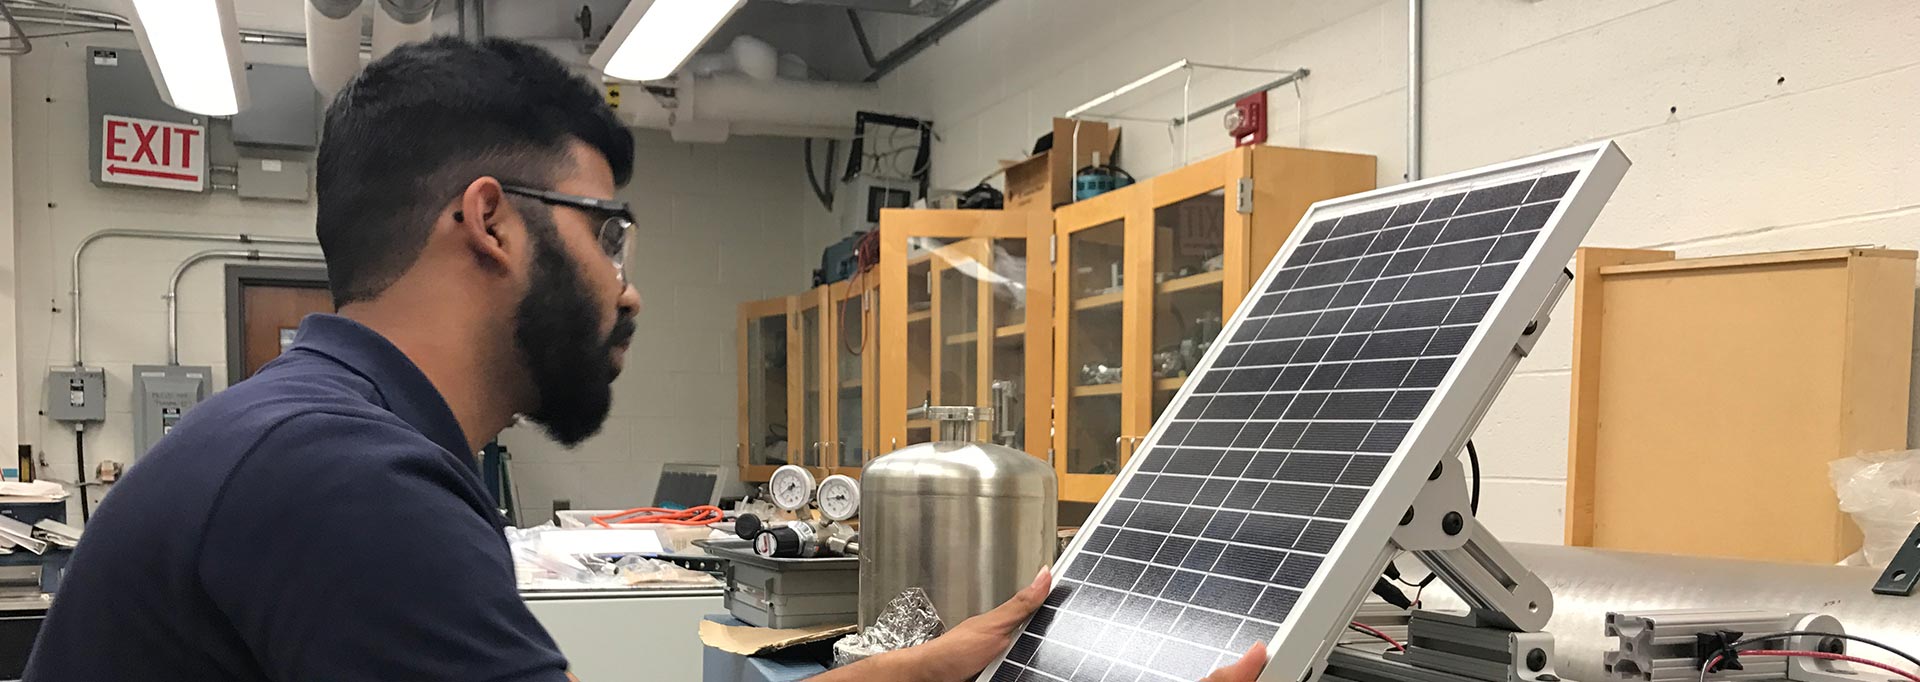 Man working on a solar panel in a lab